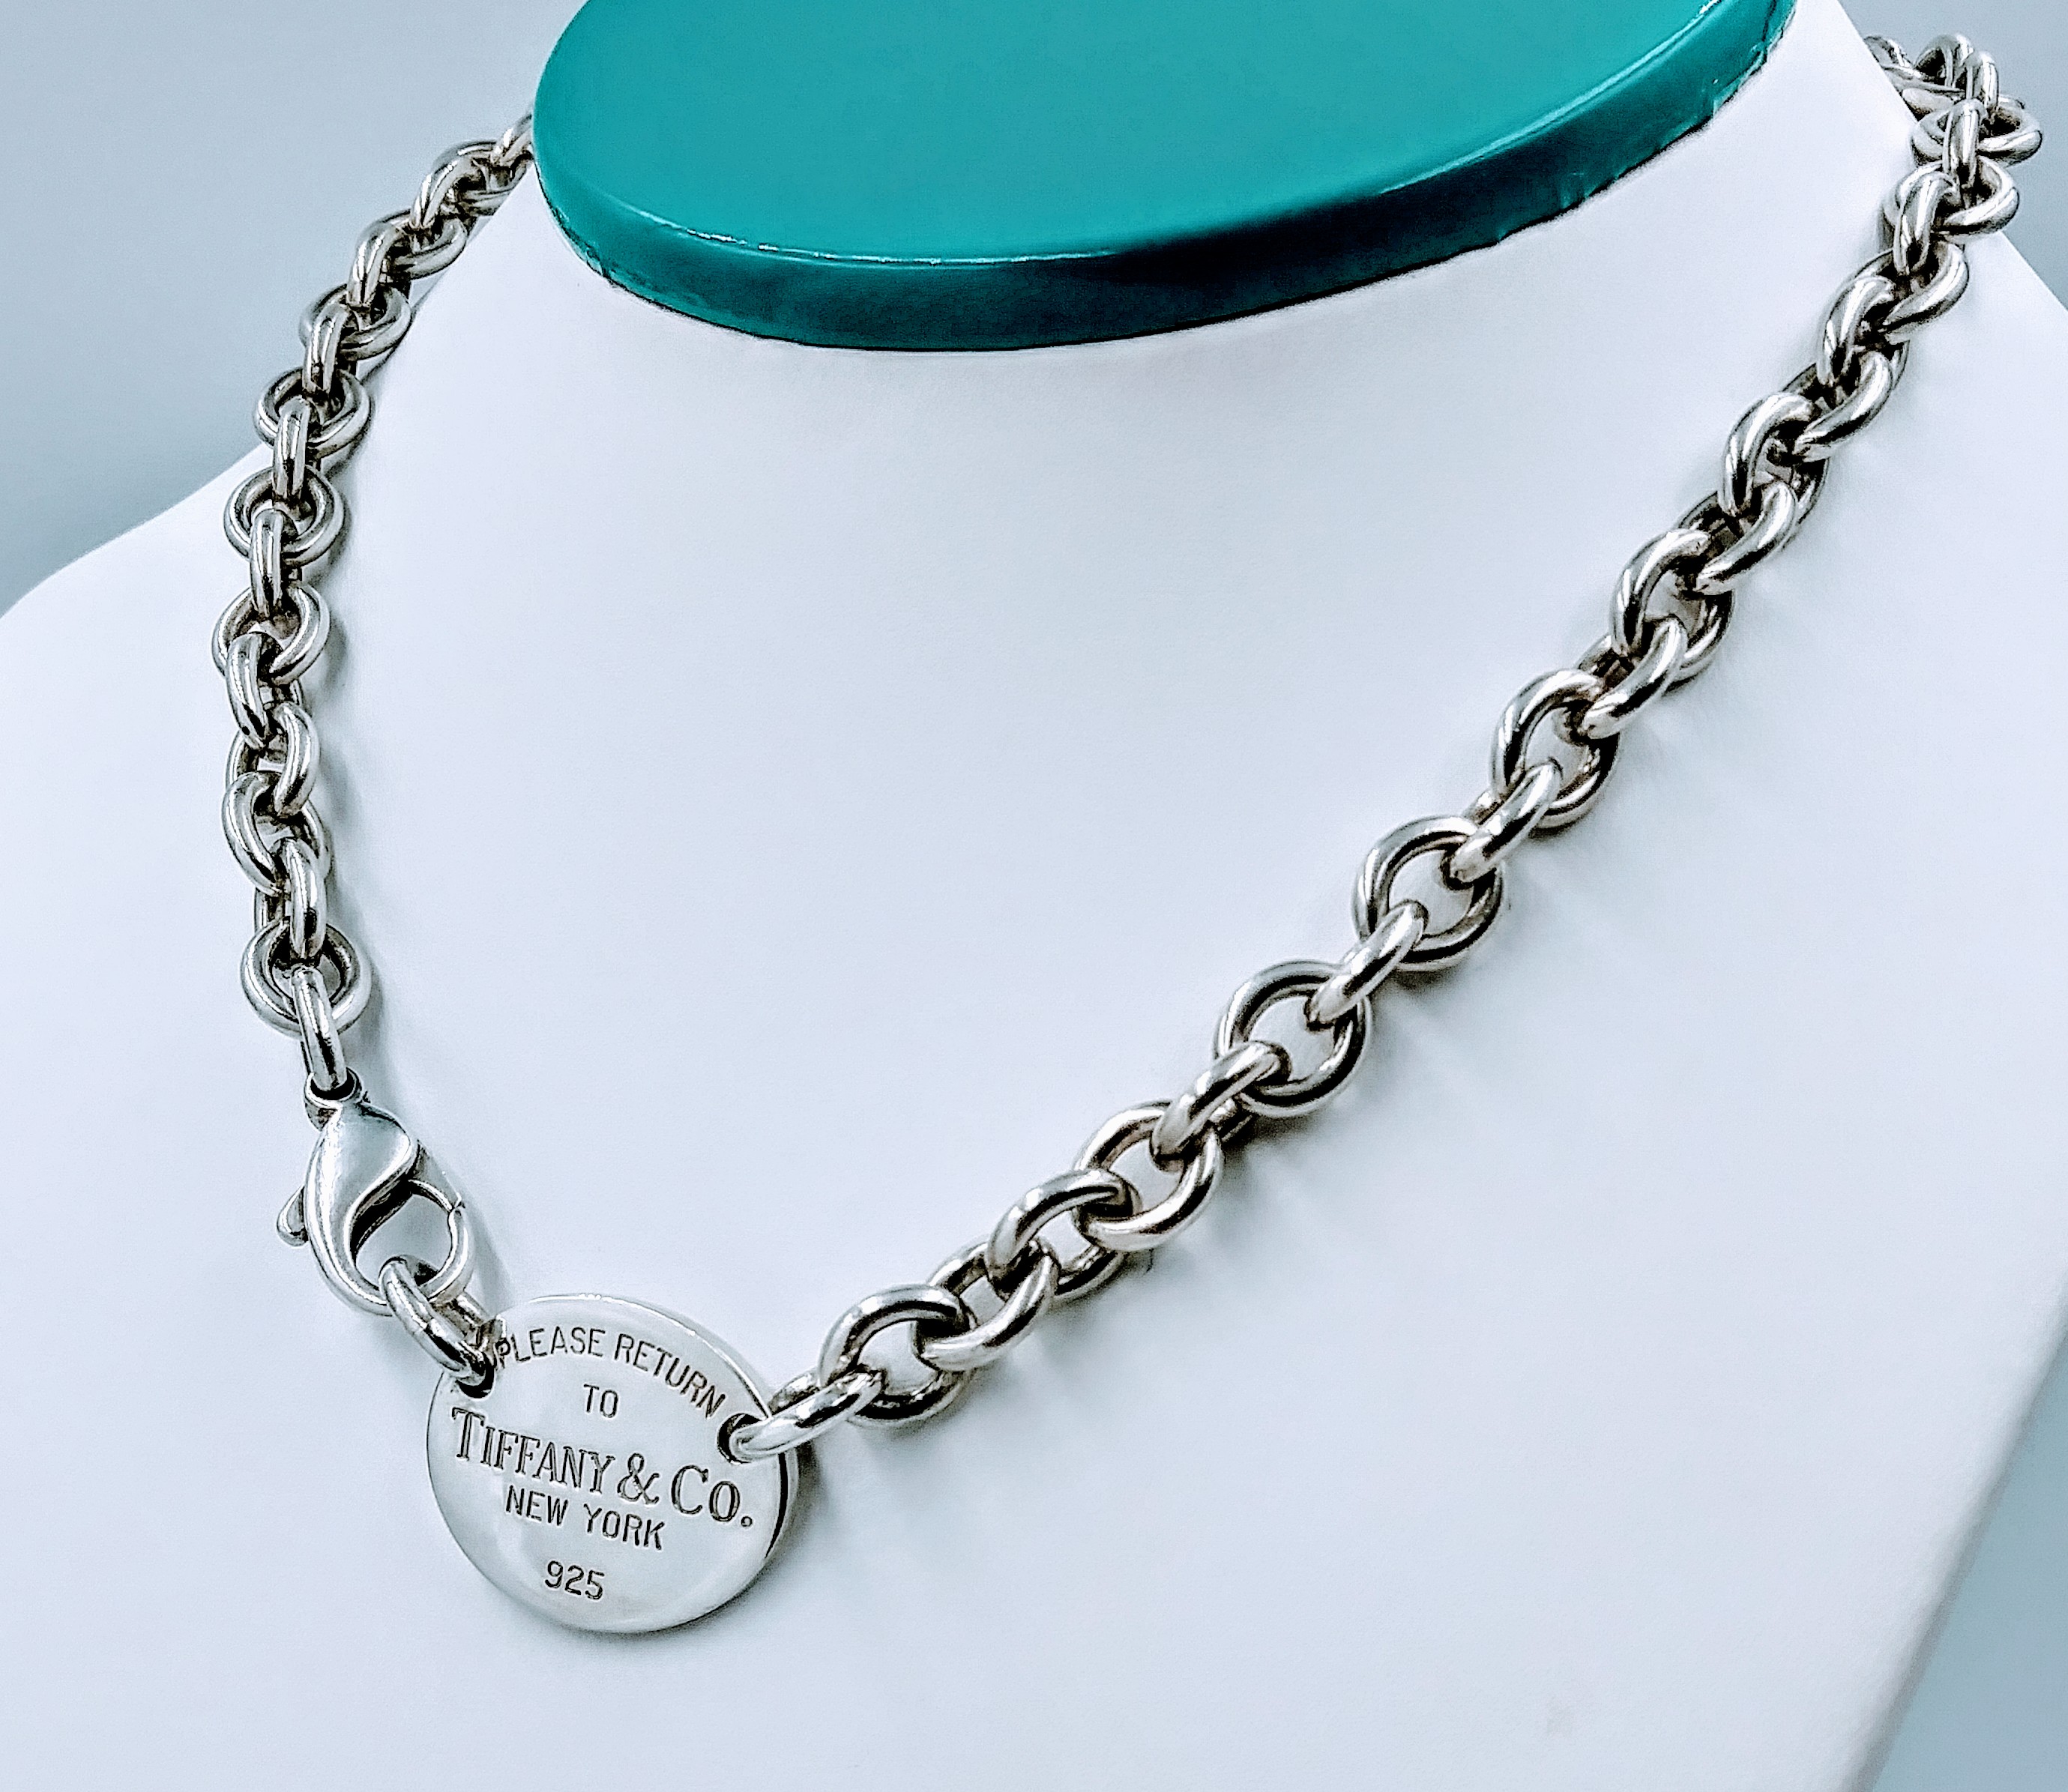 Tiffany & Co. - Please Return To Tiffany & Co. 925 Sterling Silver Oval